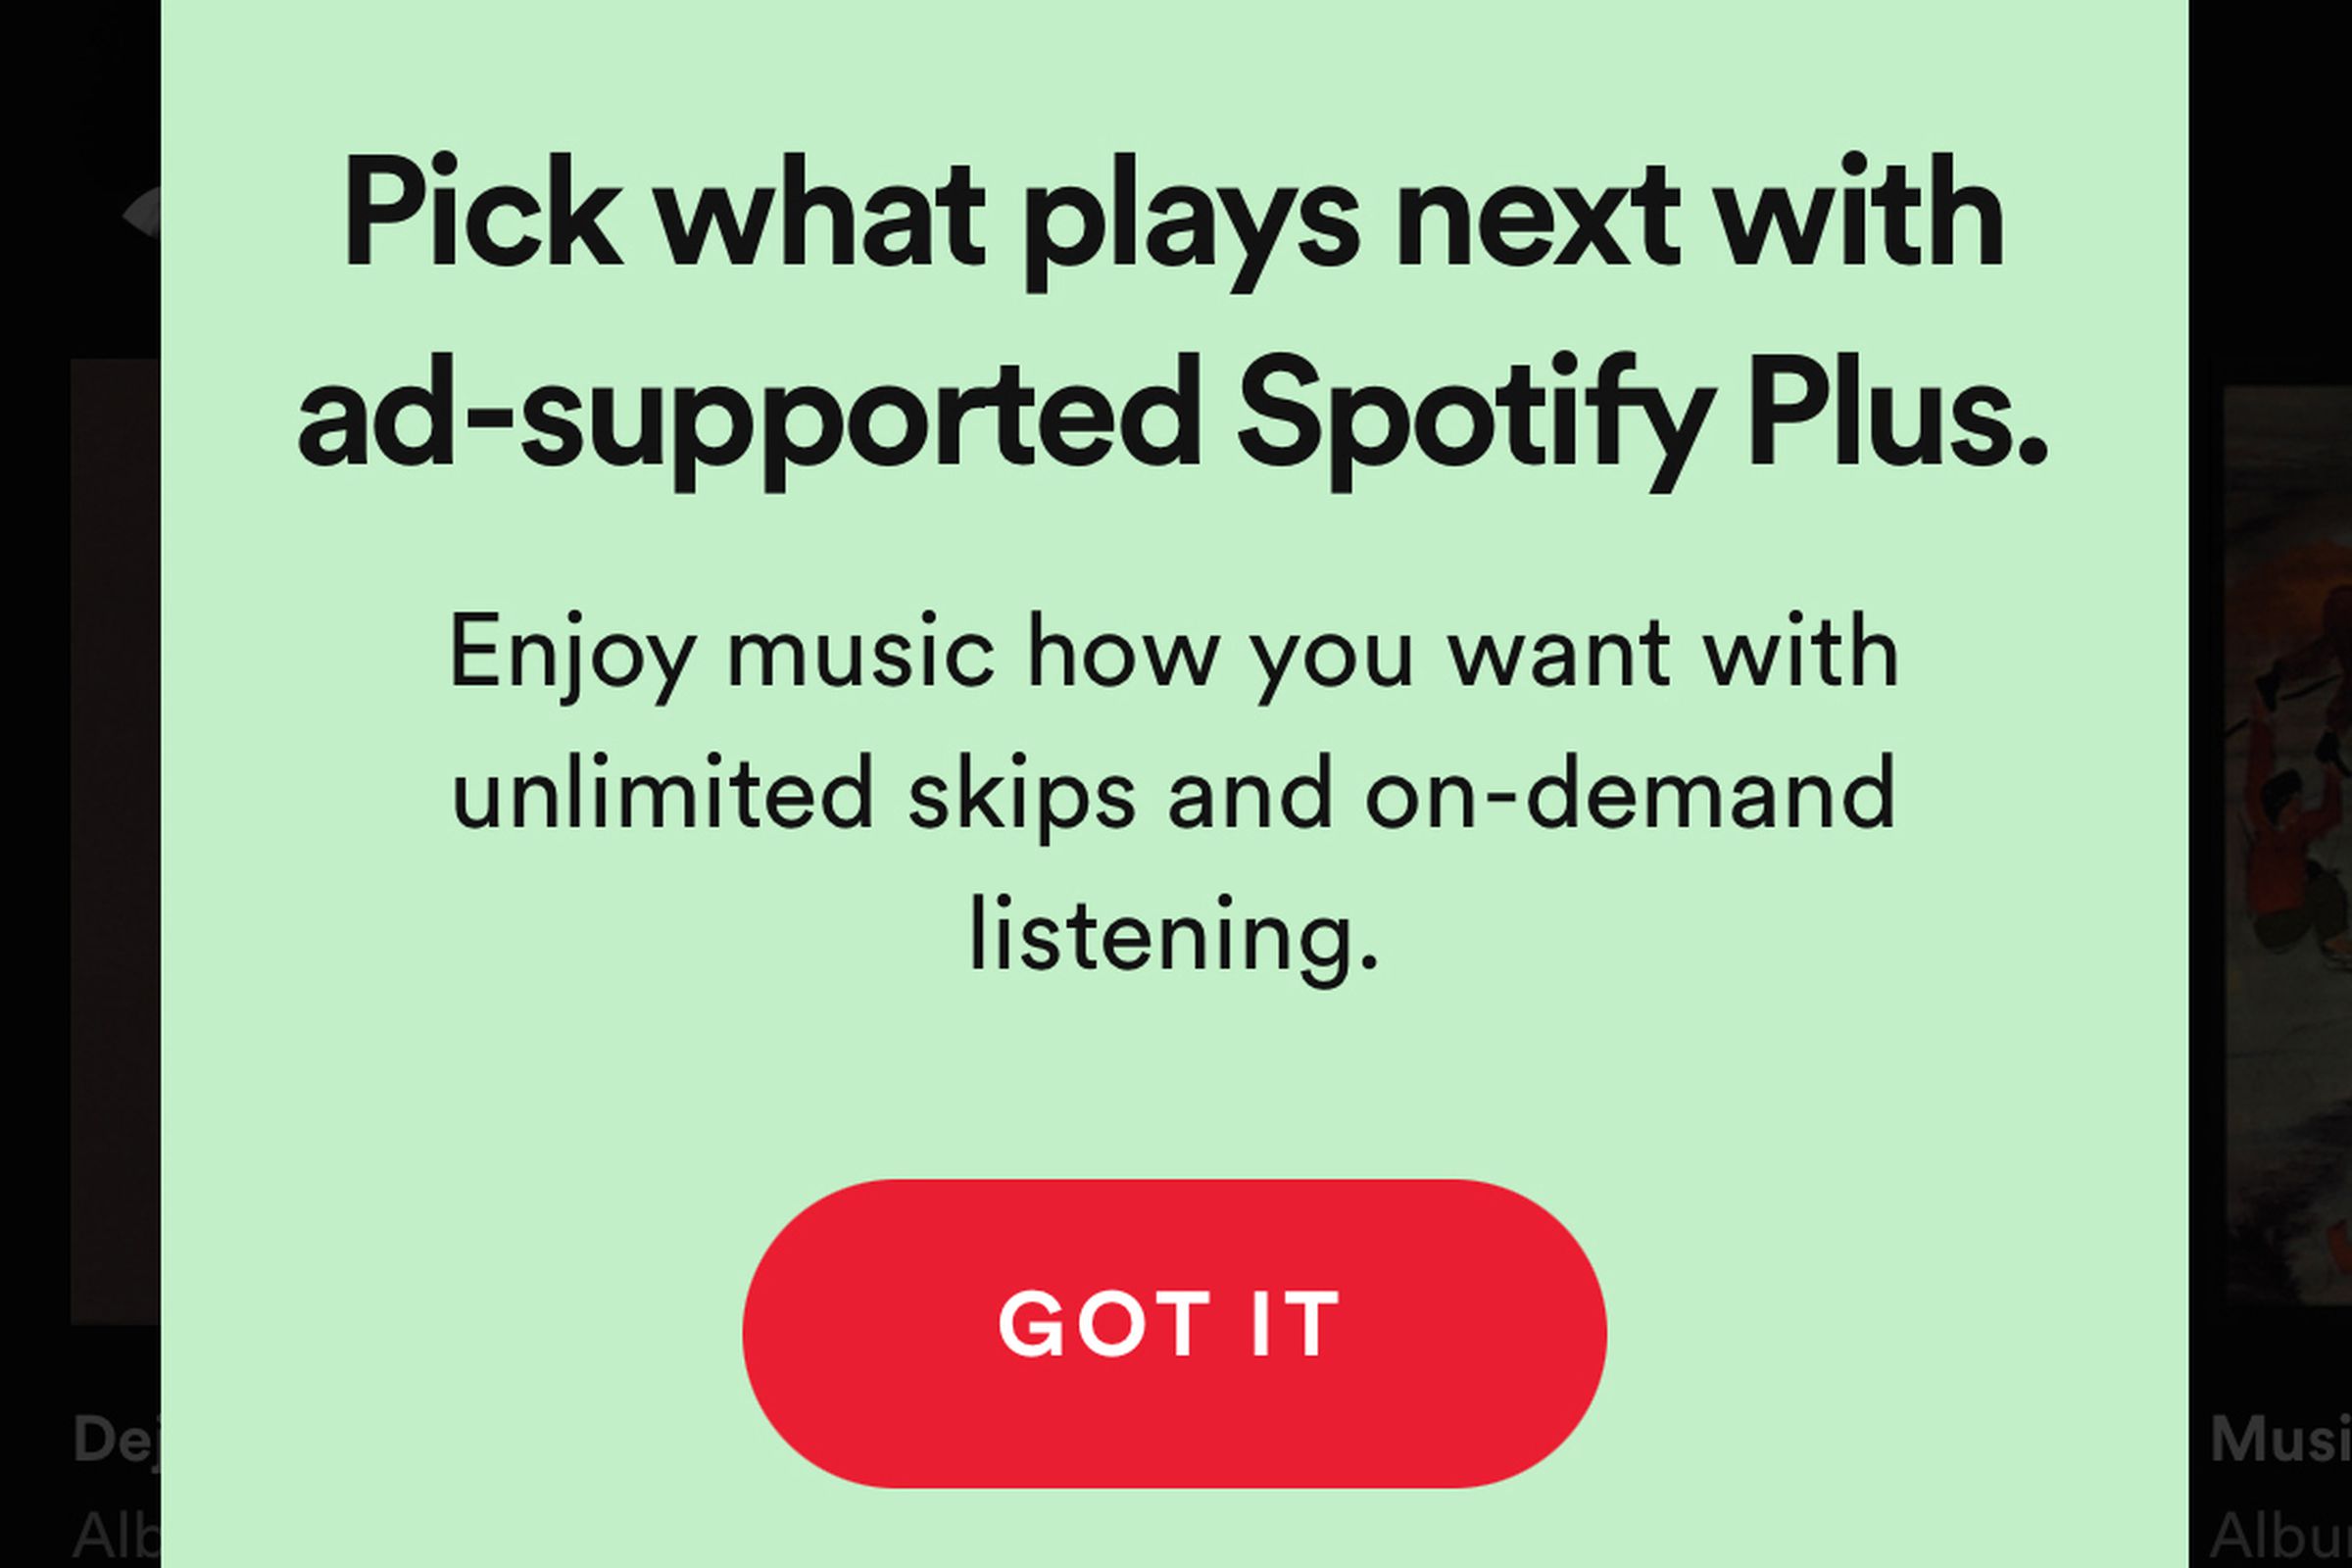 ‘Unlimited skips and on-demand listening’ for $0.99 a month.